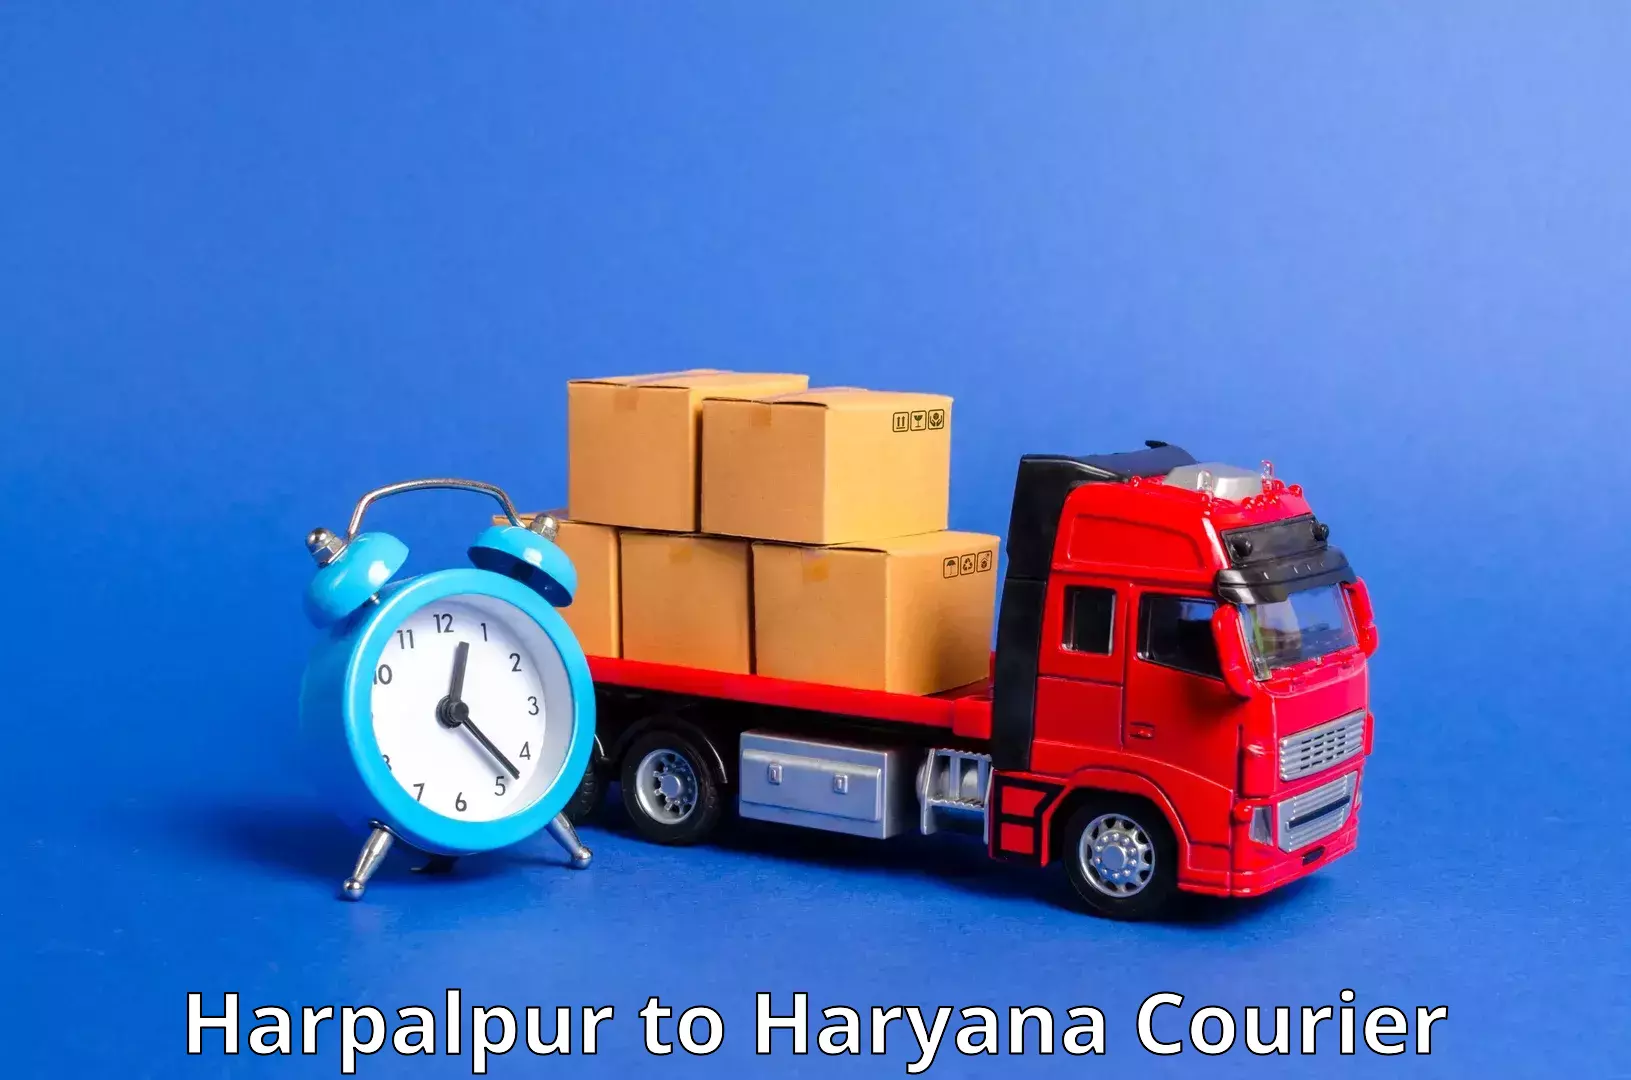 Nationwide shipping coverage Harpalpur to Fatehabad